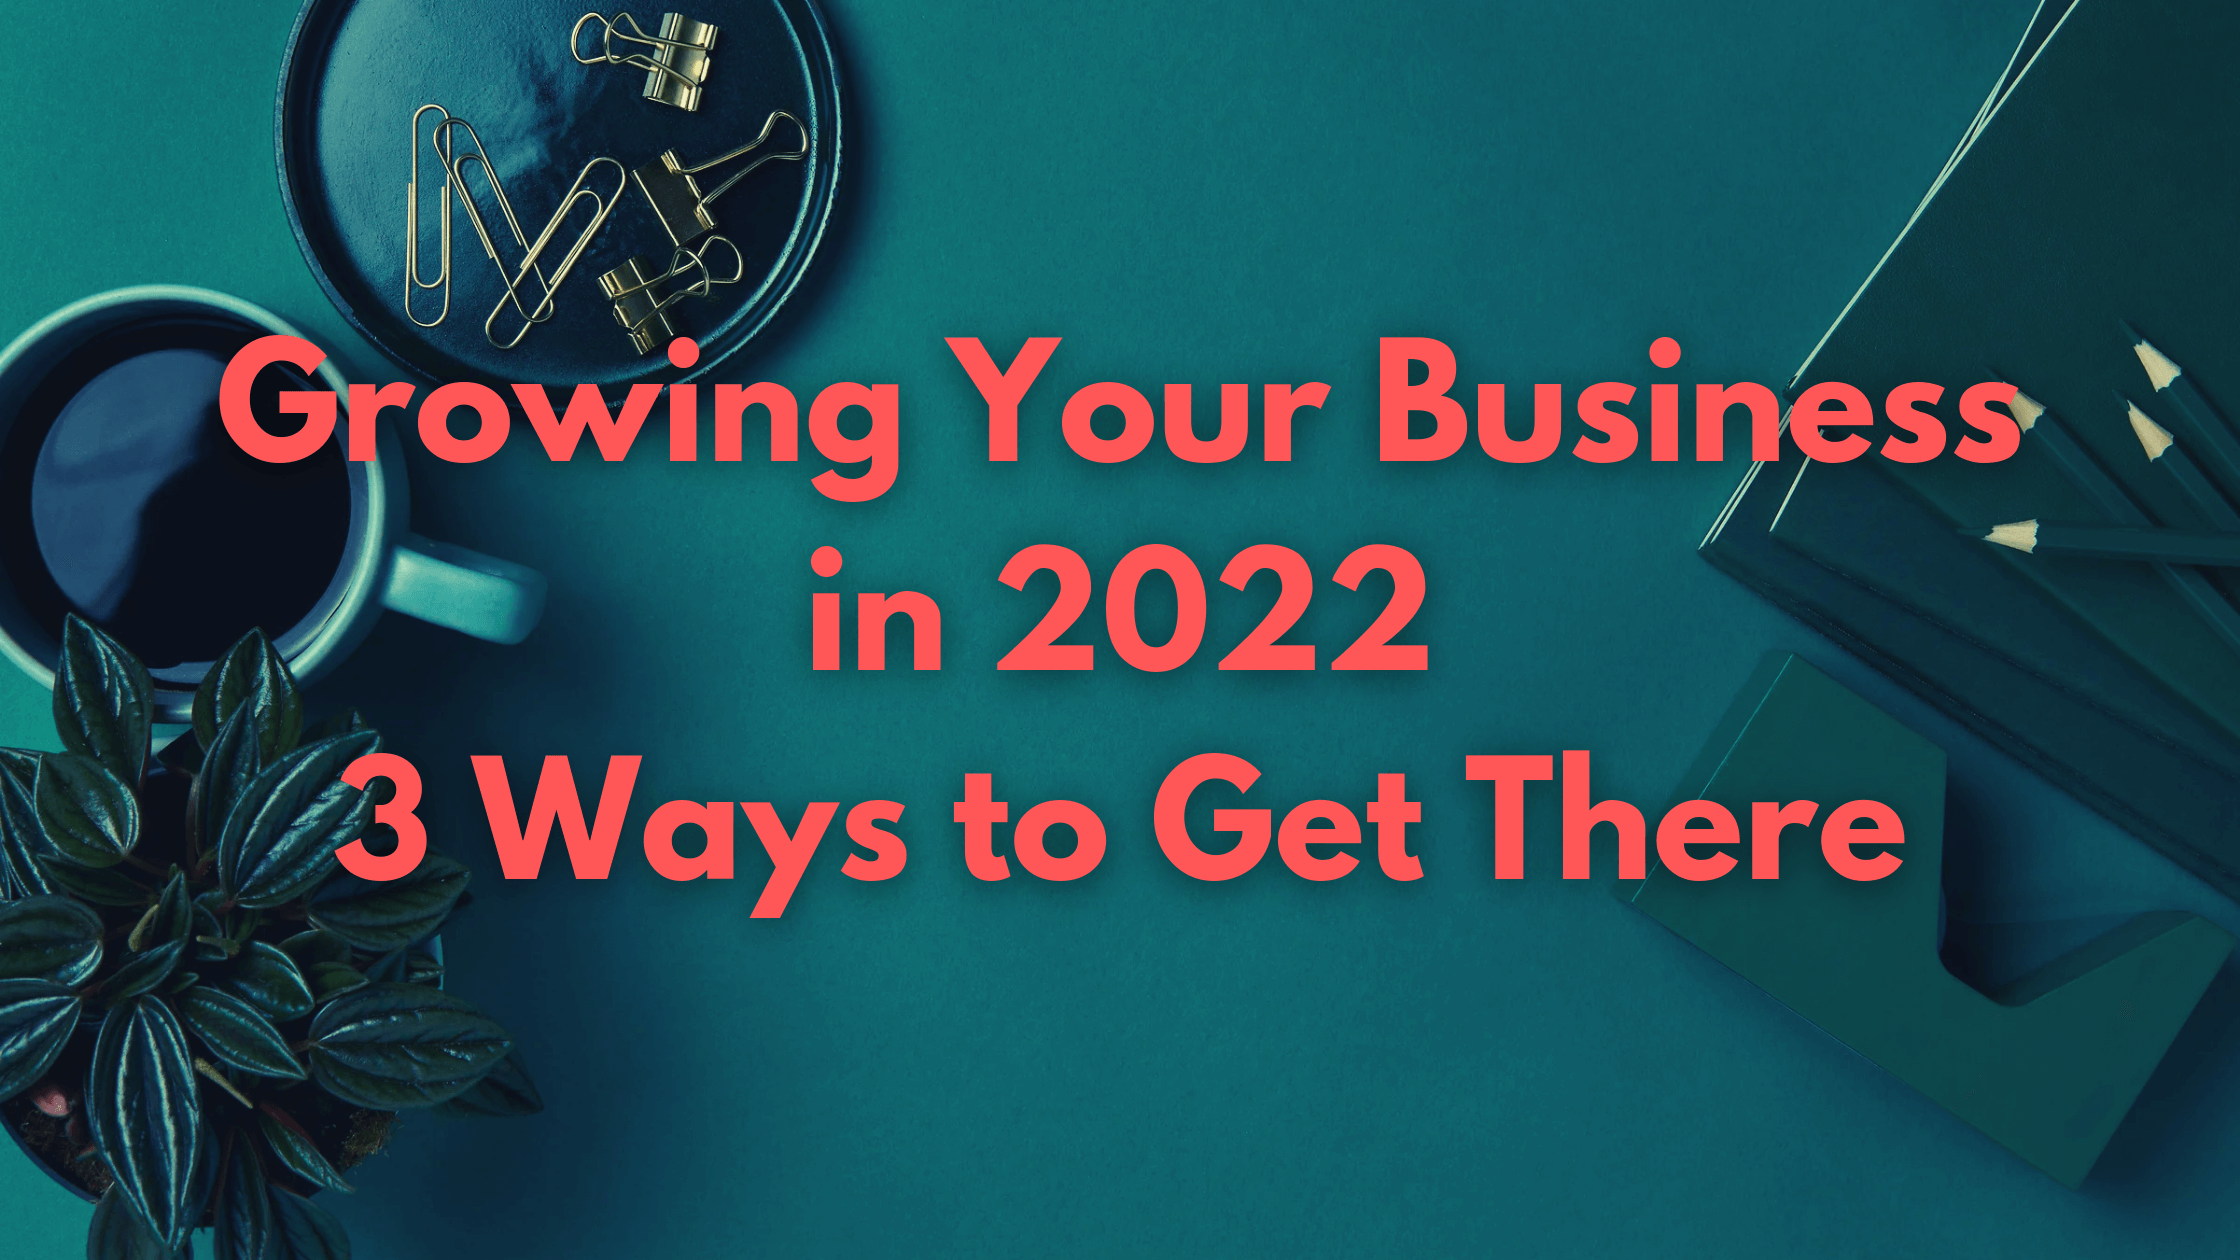 Ways for Growing Your Business as an entrepreneur and build business